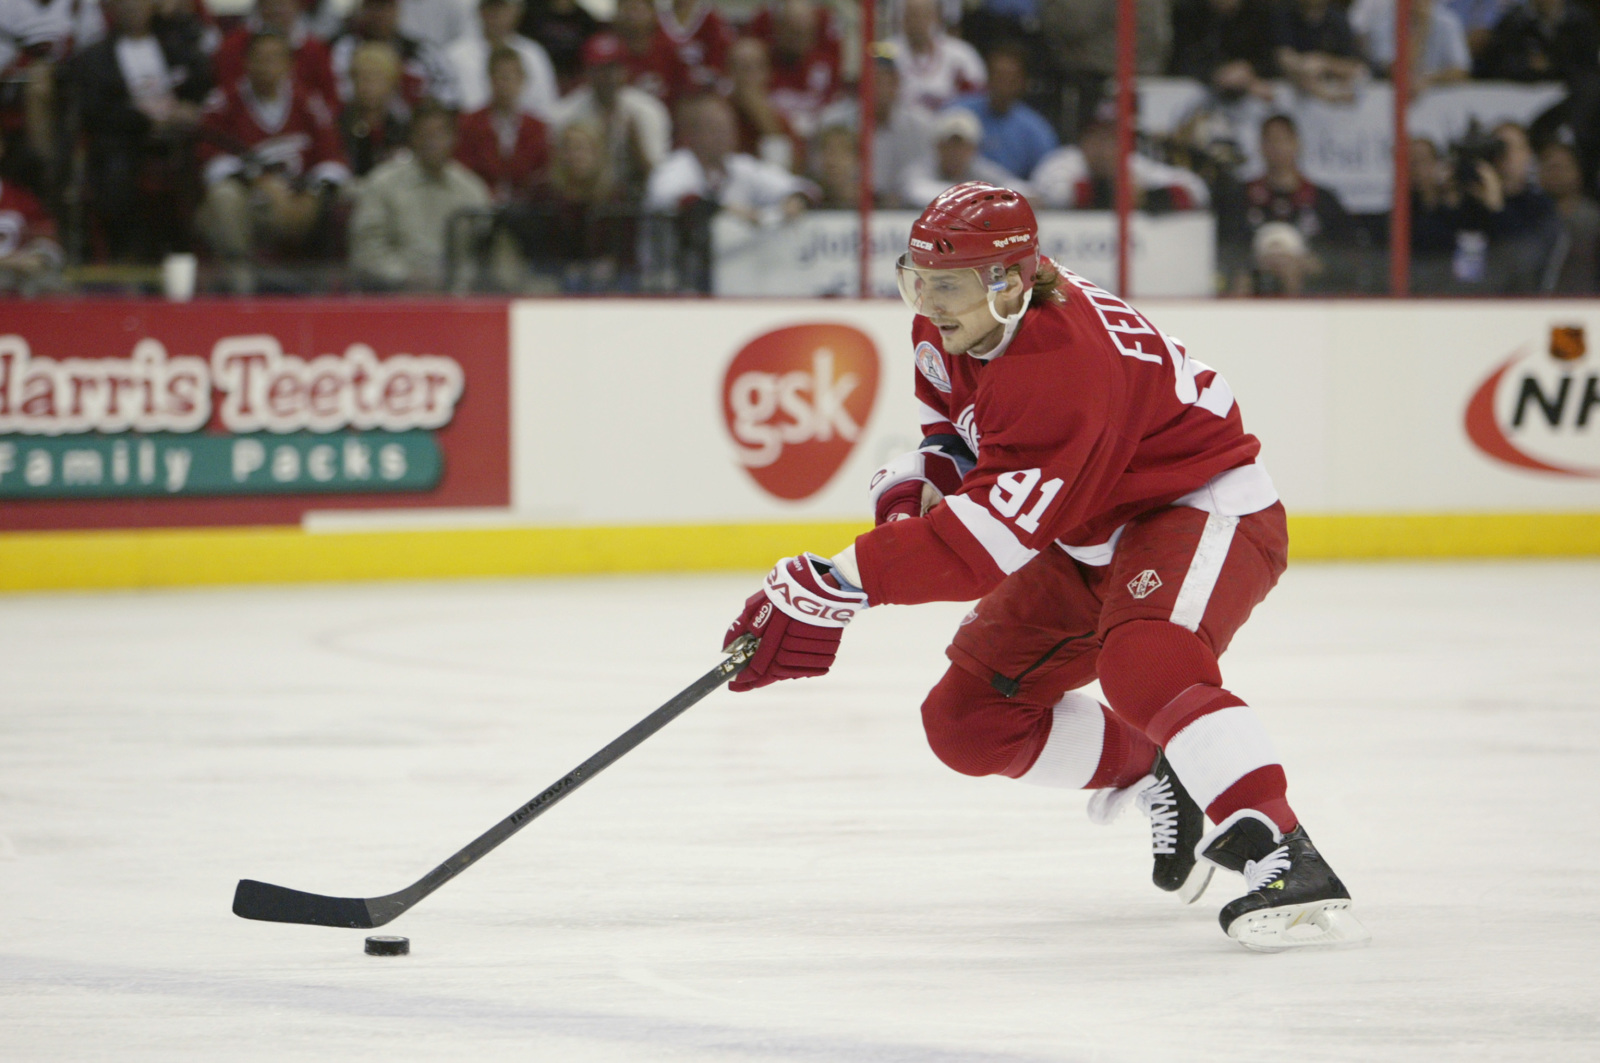 Could Sergei Fedorov be returning to the Detroit Red Wings?